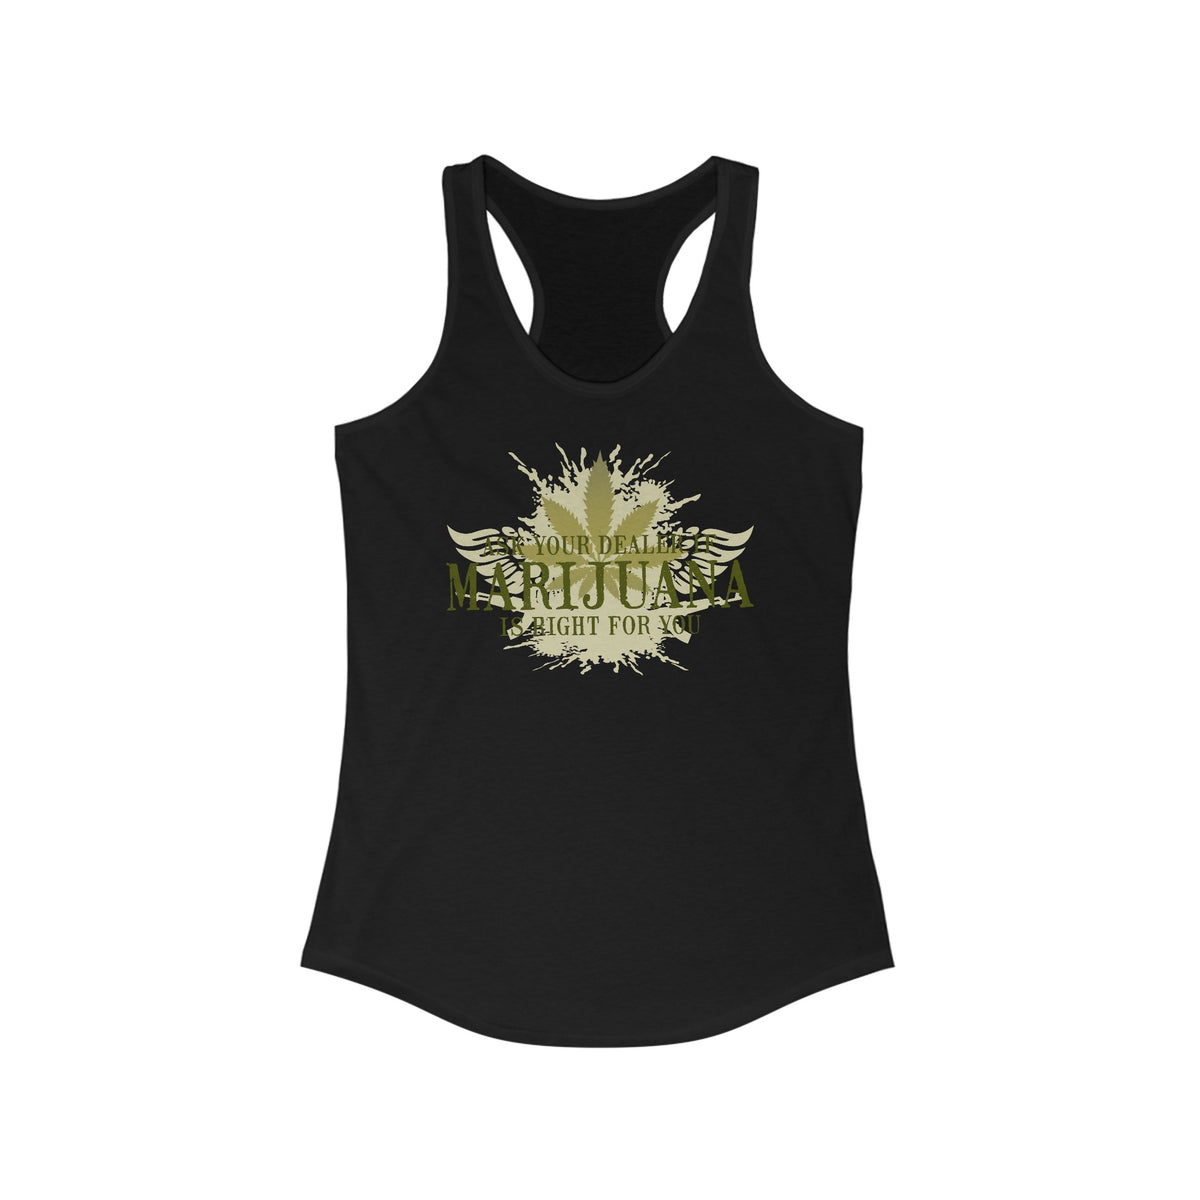 Ask Your Dealer If Marijuana Is Right For You - Women’s Racerback Tank